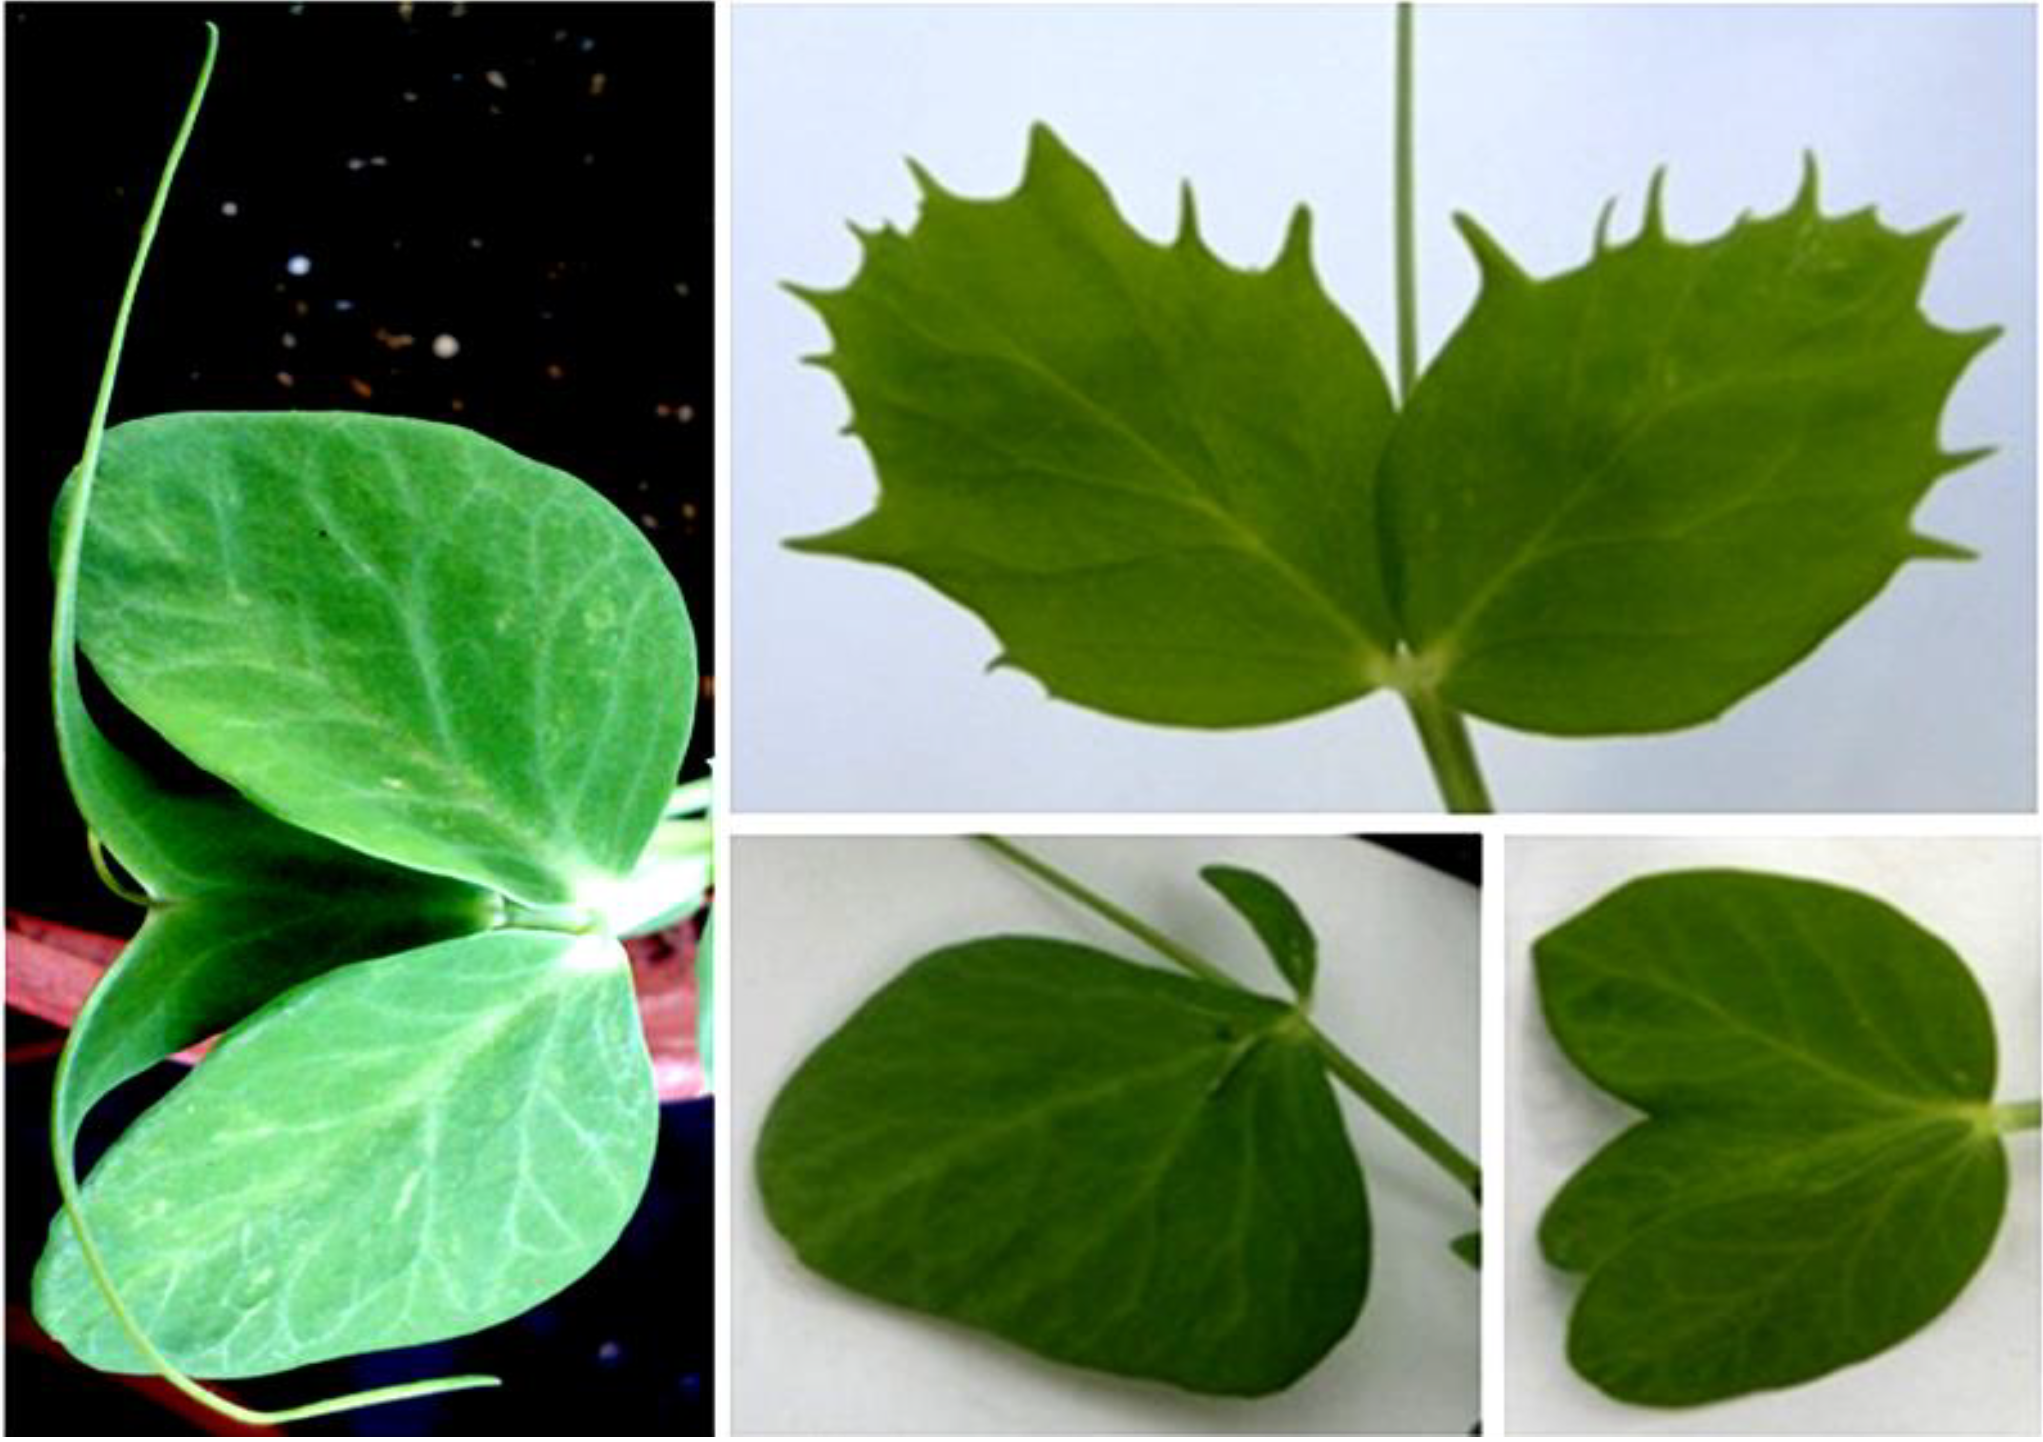 Genetics of 4-leaf clovers remain mysterious